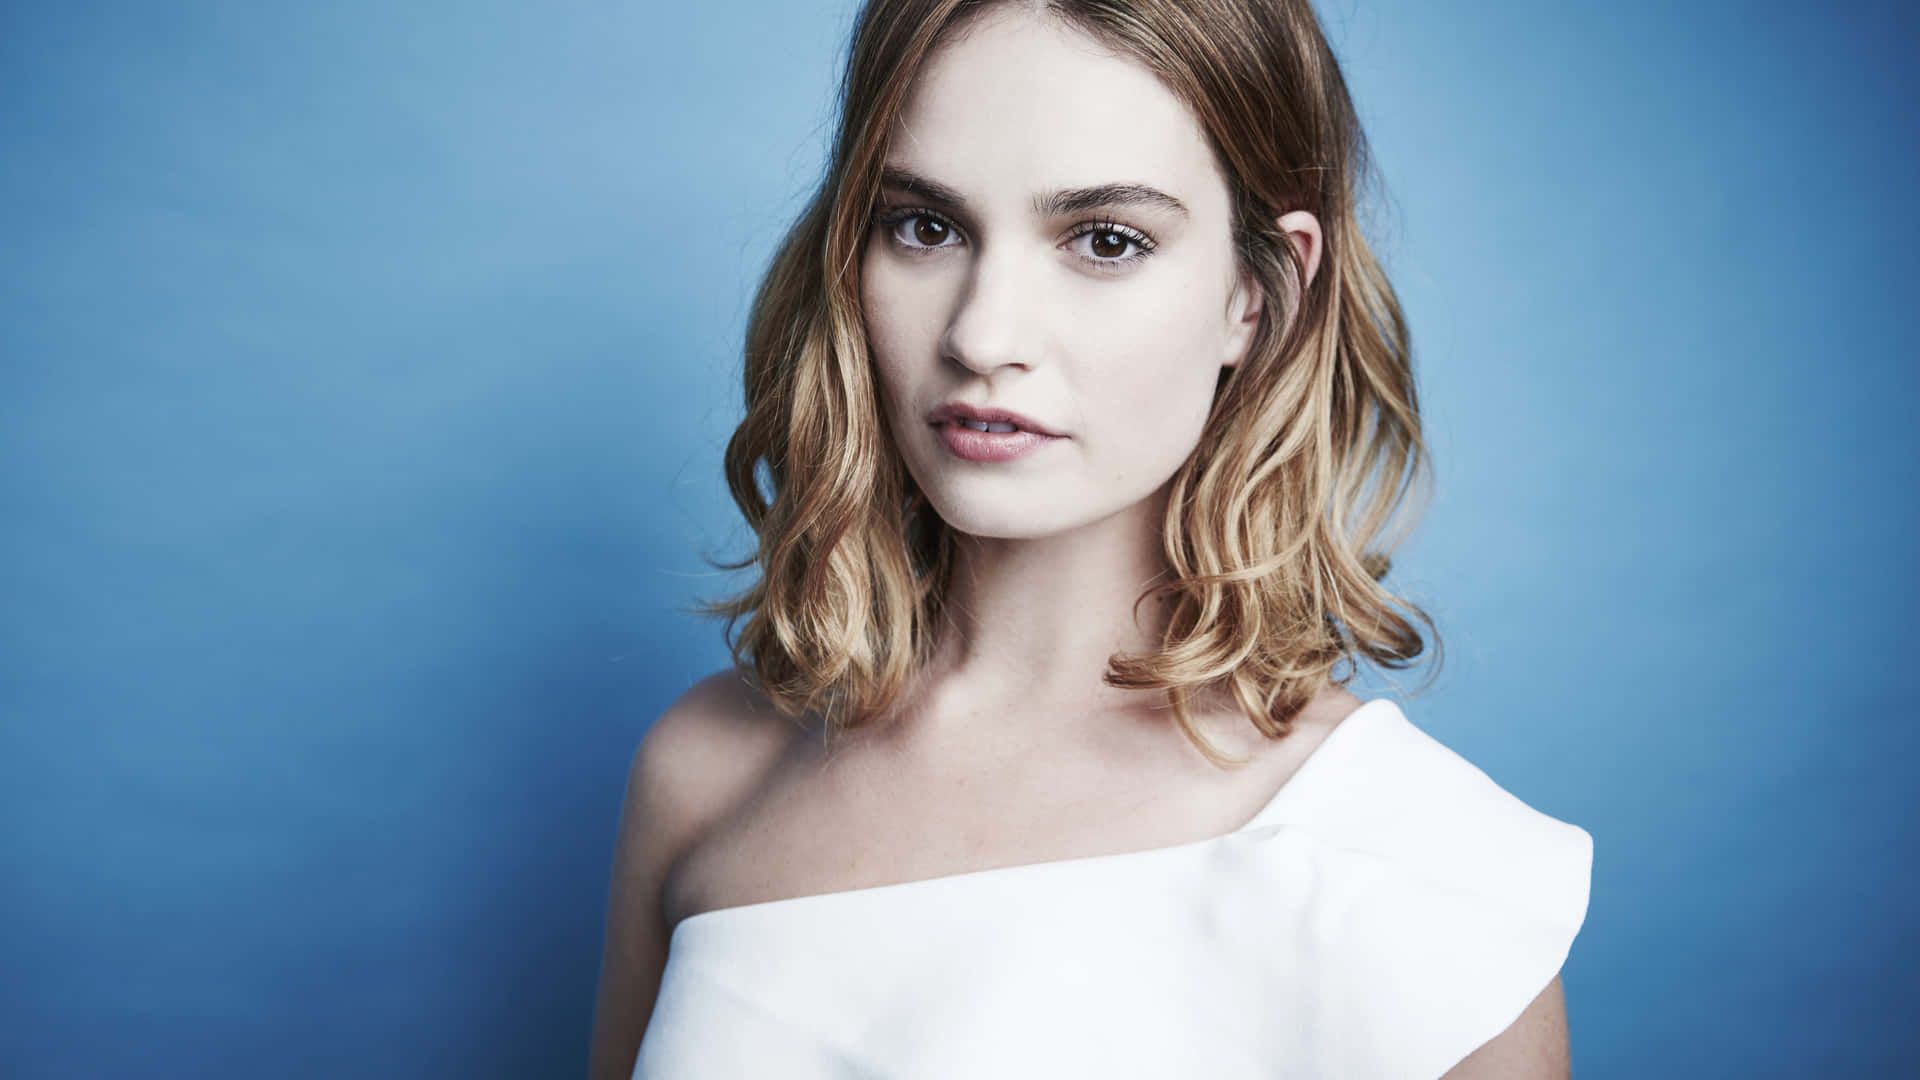 Captivating Lily James In An Elegant Pose Wallpaper